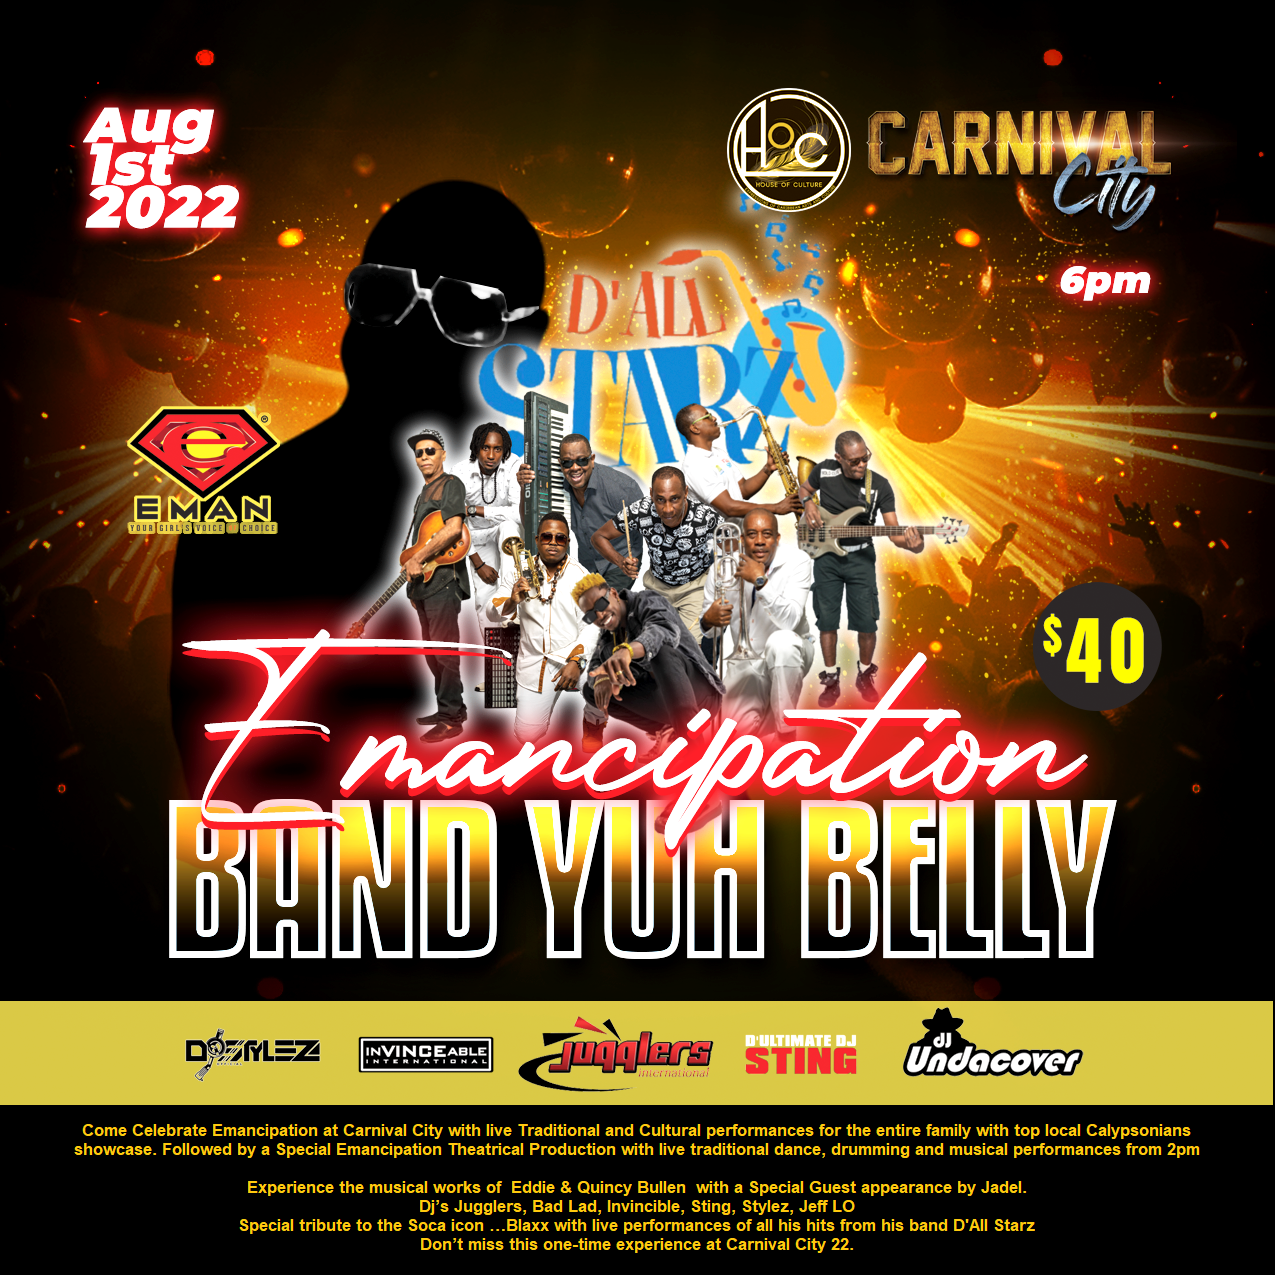 Band Yuh Belly - Carnival City